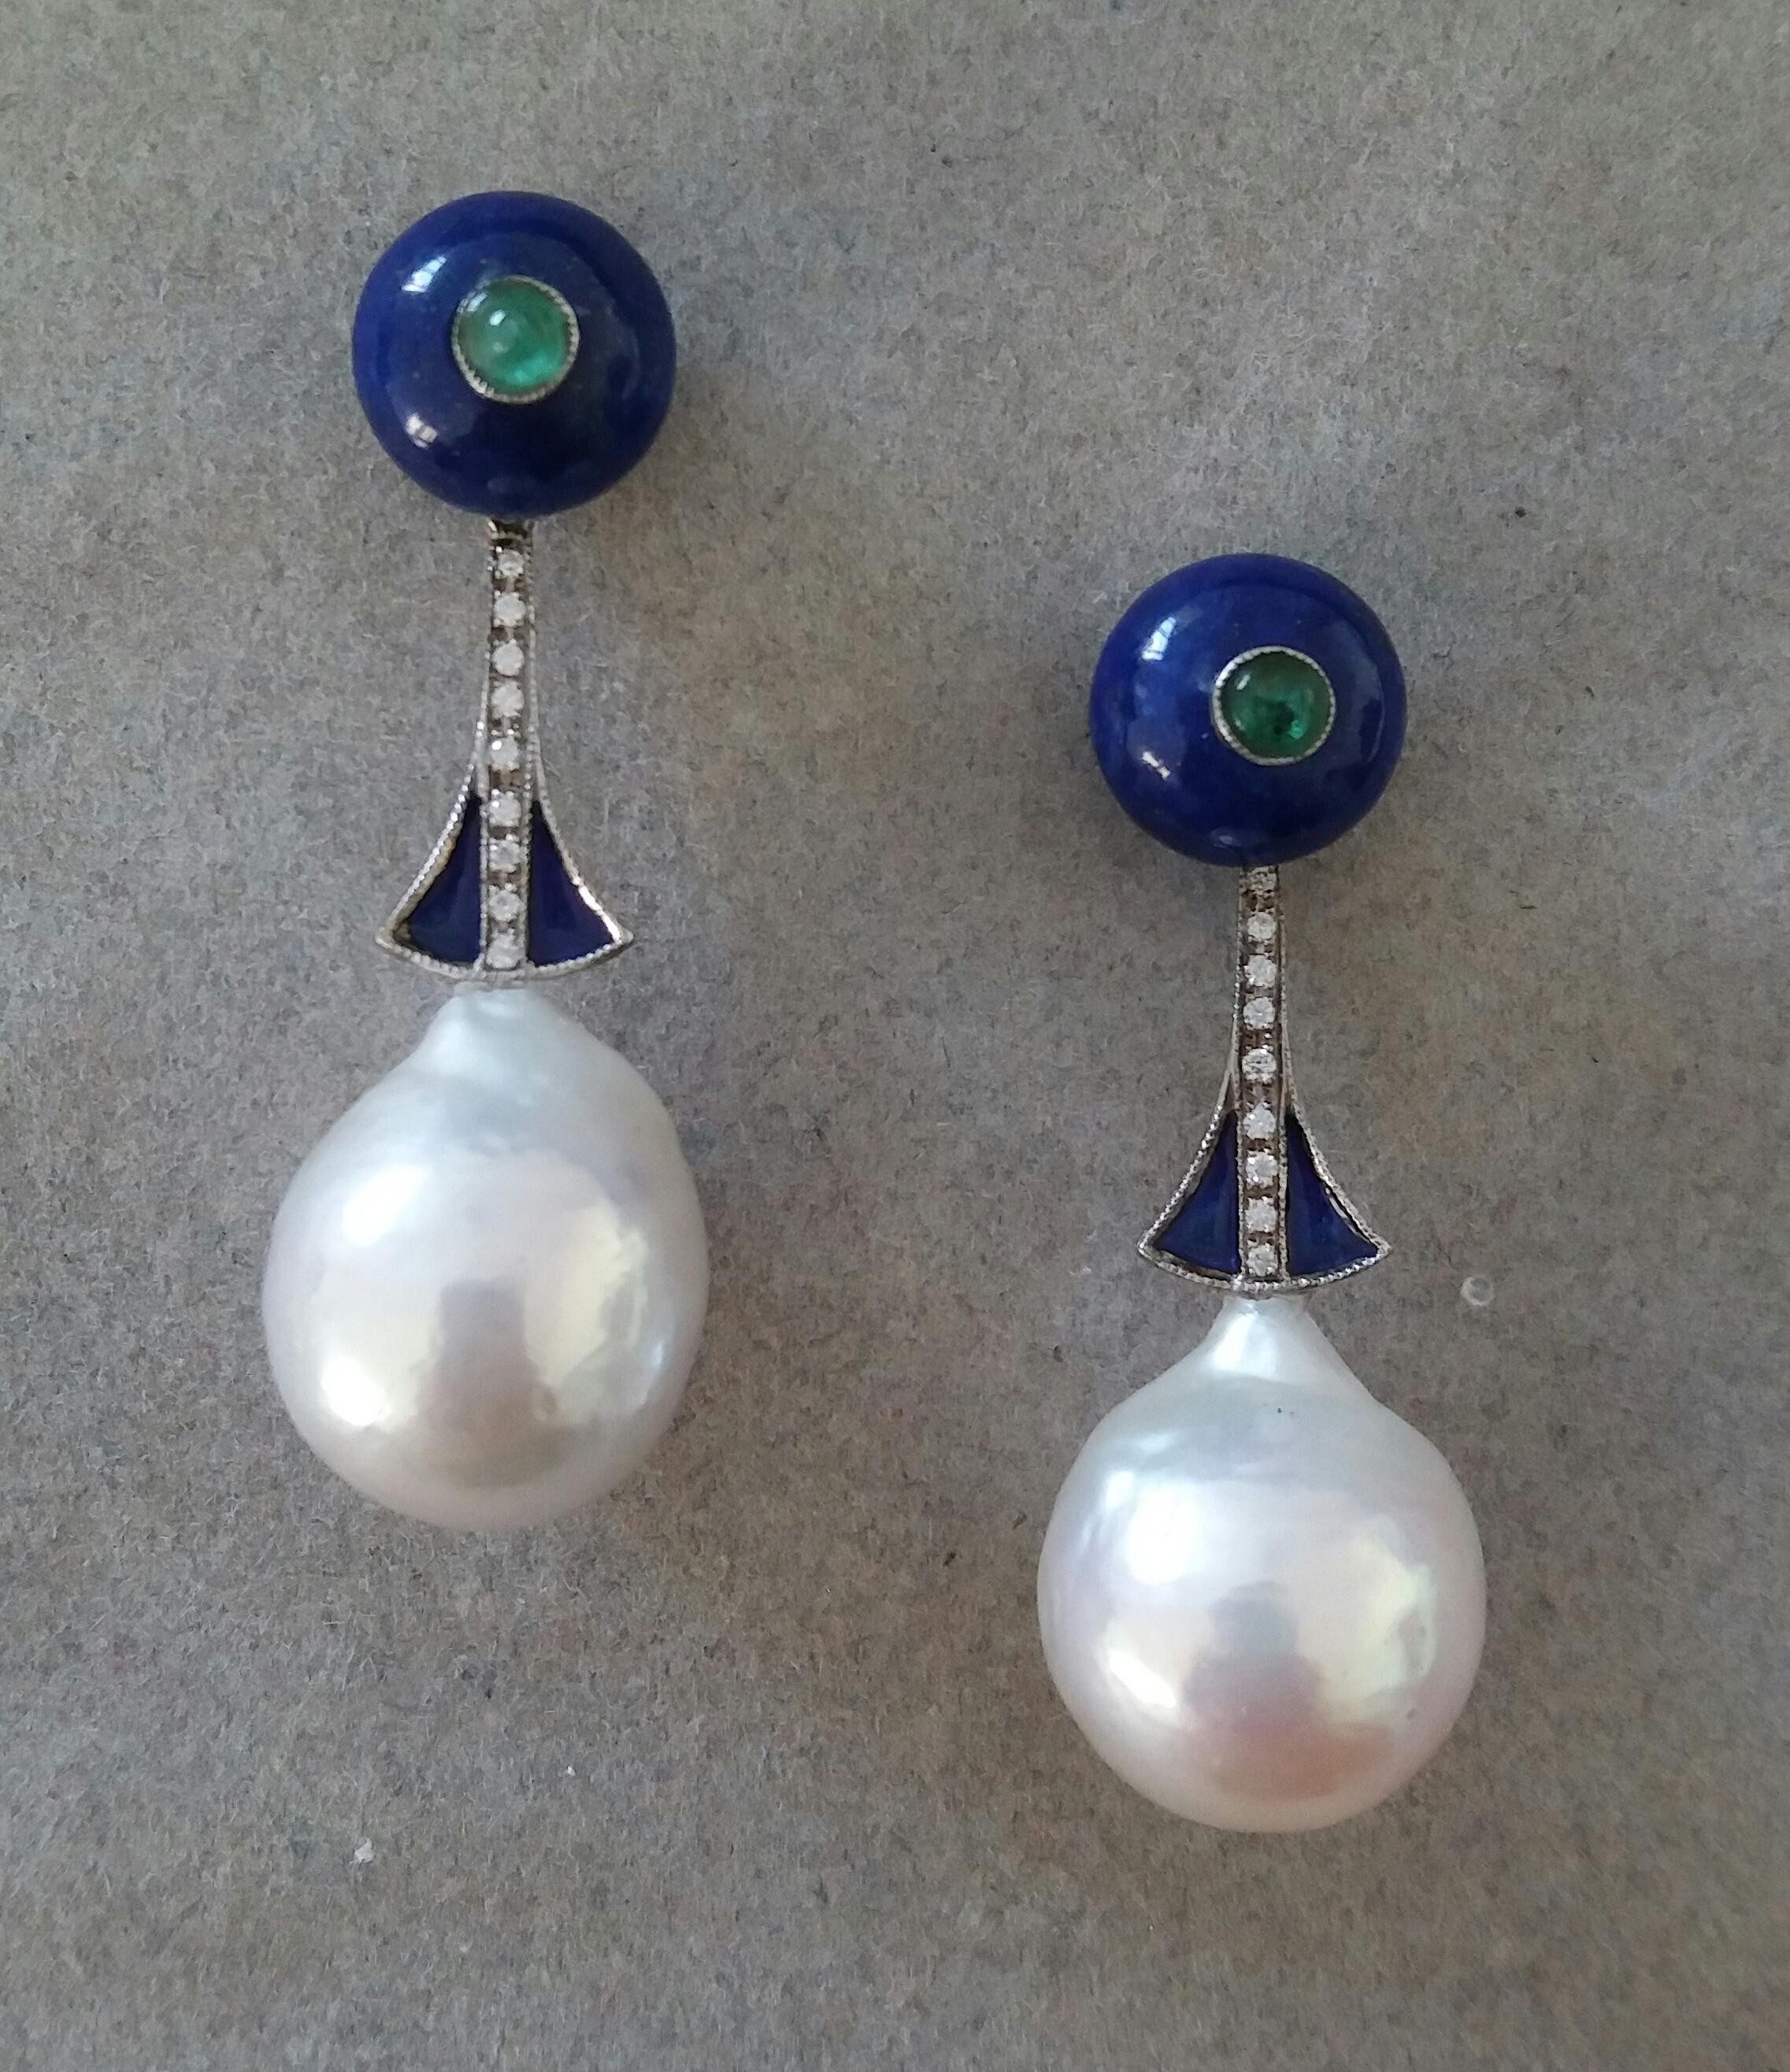 2 round buttons of 10 mm in diameter with in the middle 2 small round Emerald cabs are the upper part, then the central part is white gold,18 small round full cut diamonds and blue enamel, the lower part is composed of 2 white baroque pearls with a